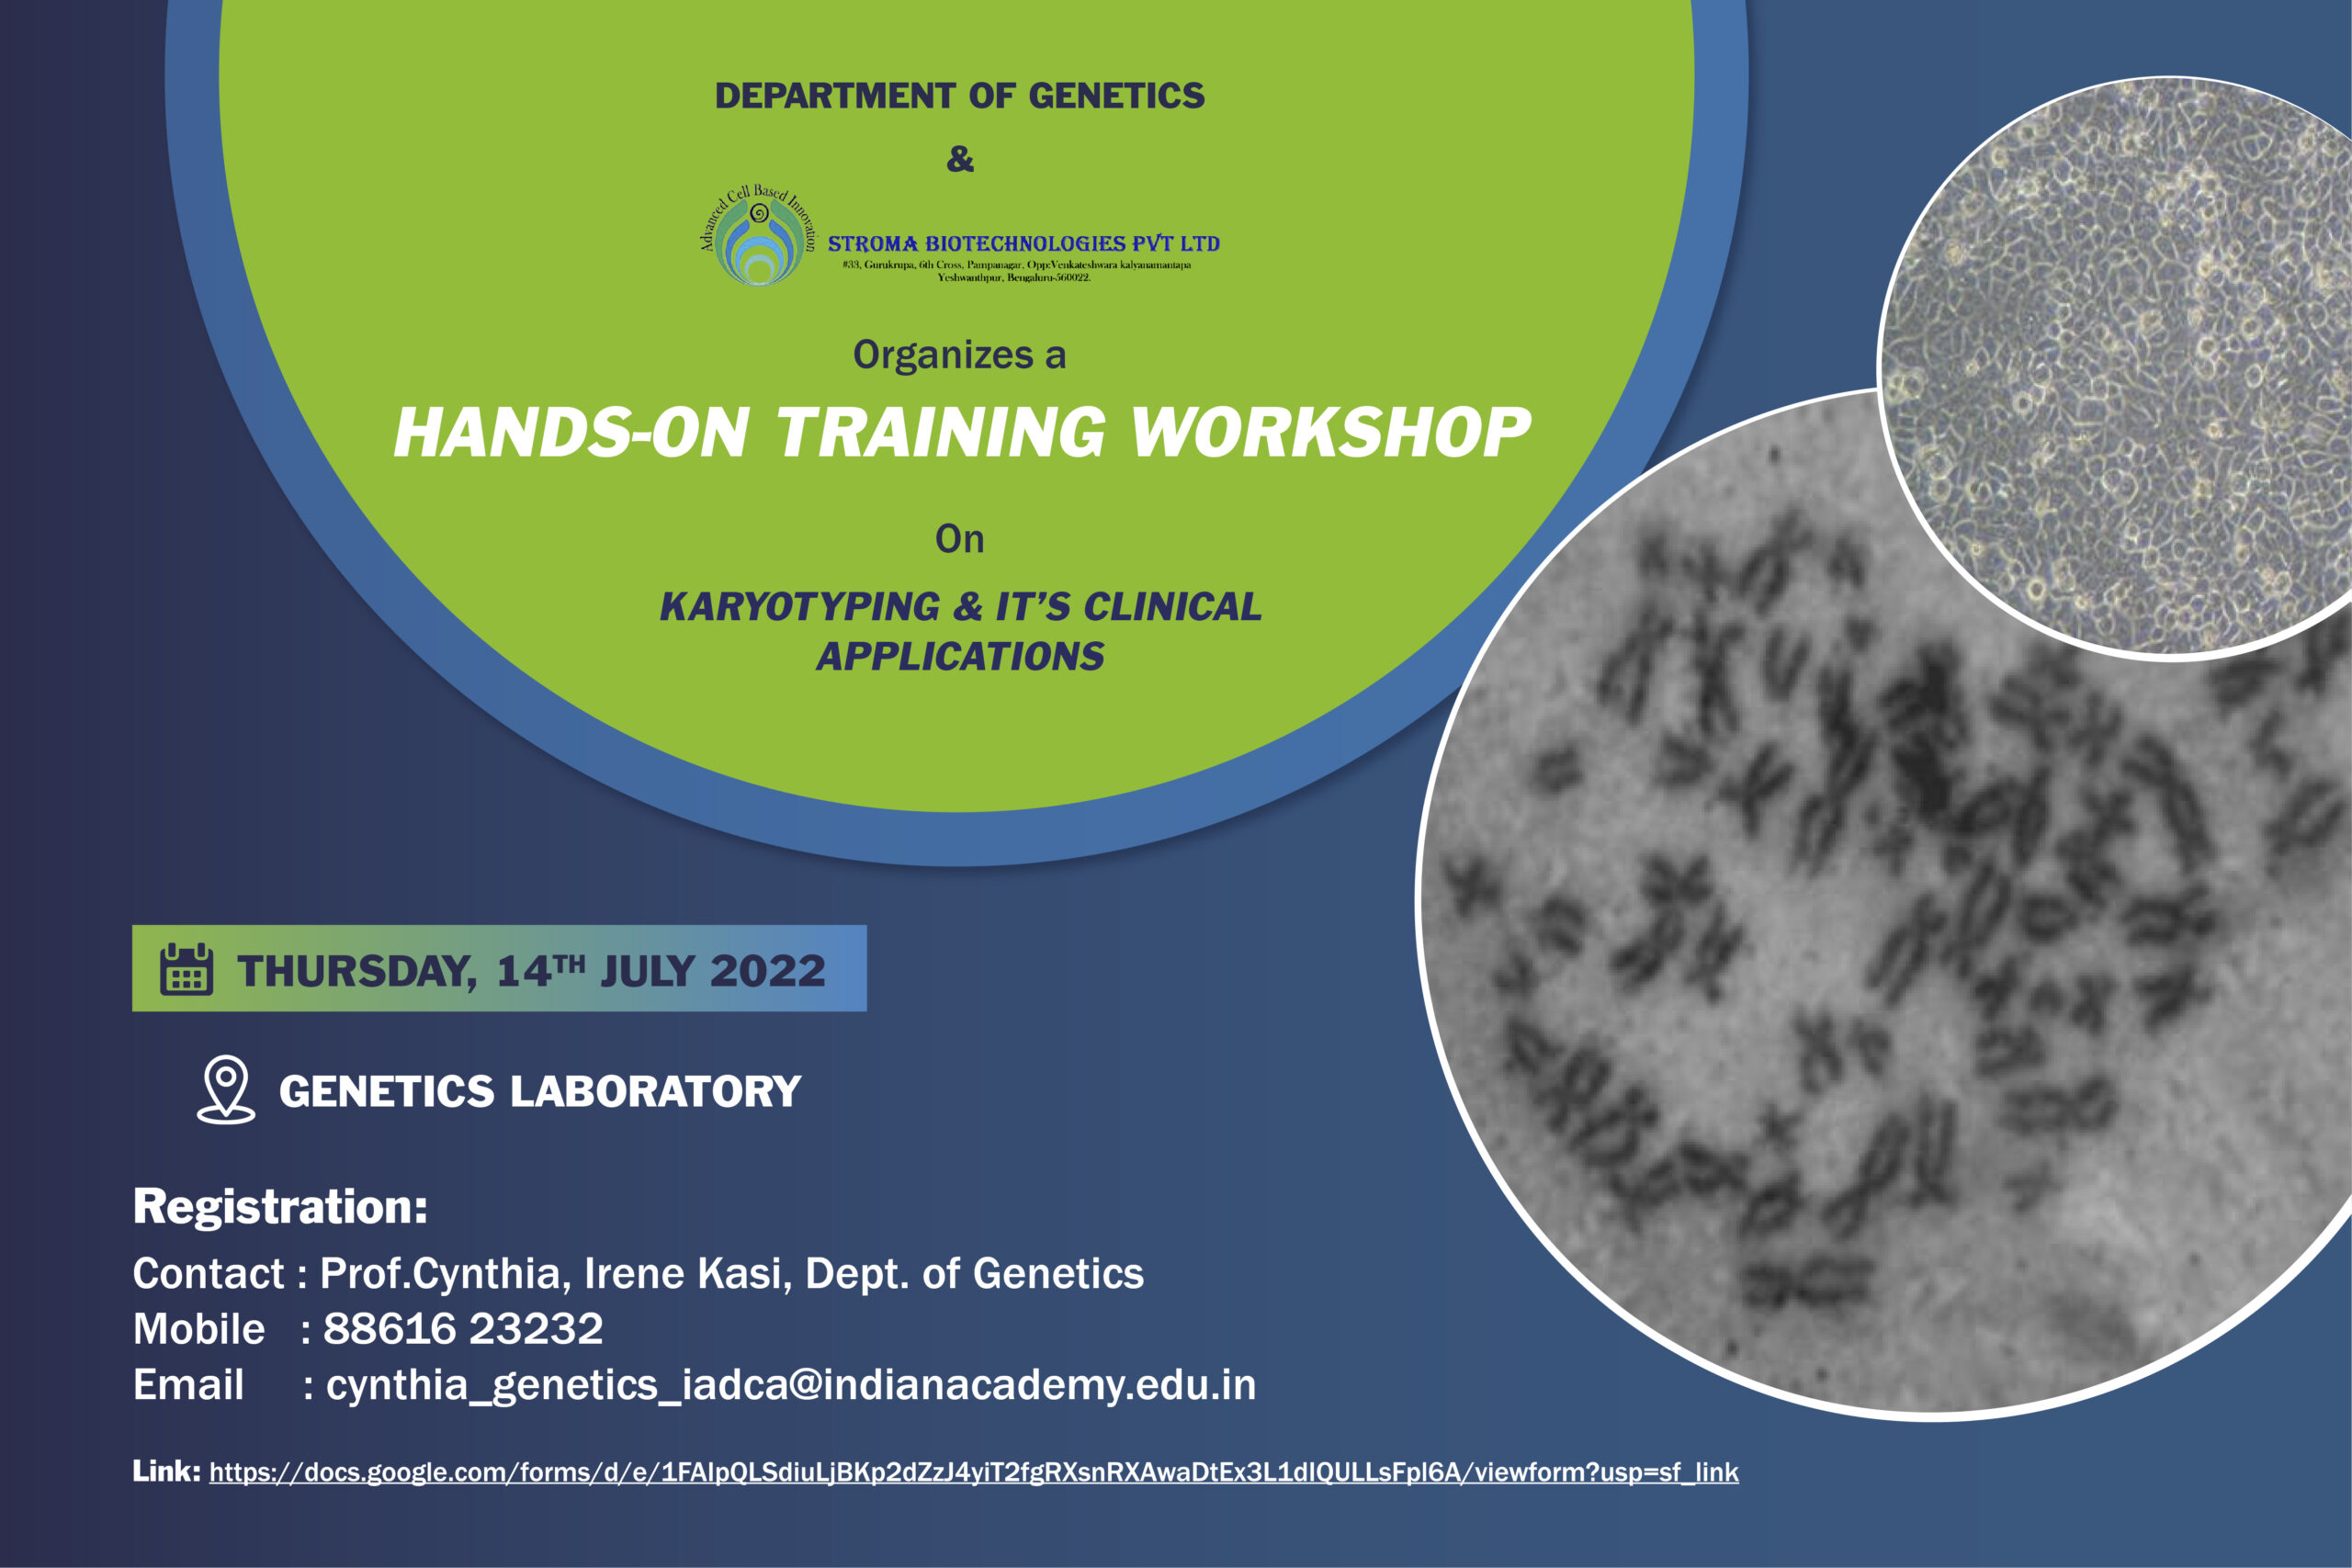 Hands-on Training Workshop on Karyotyping & it’s clinical applications